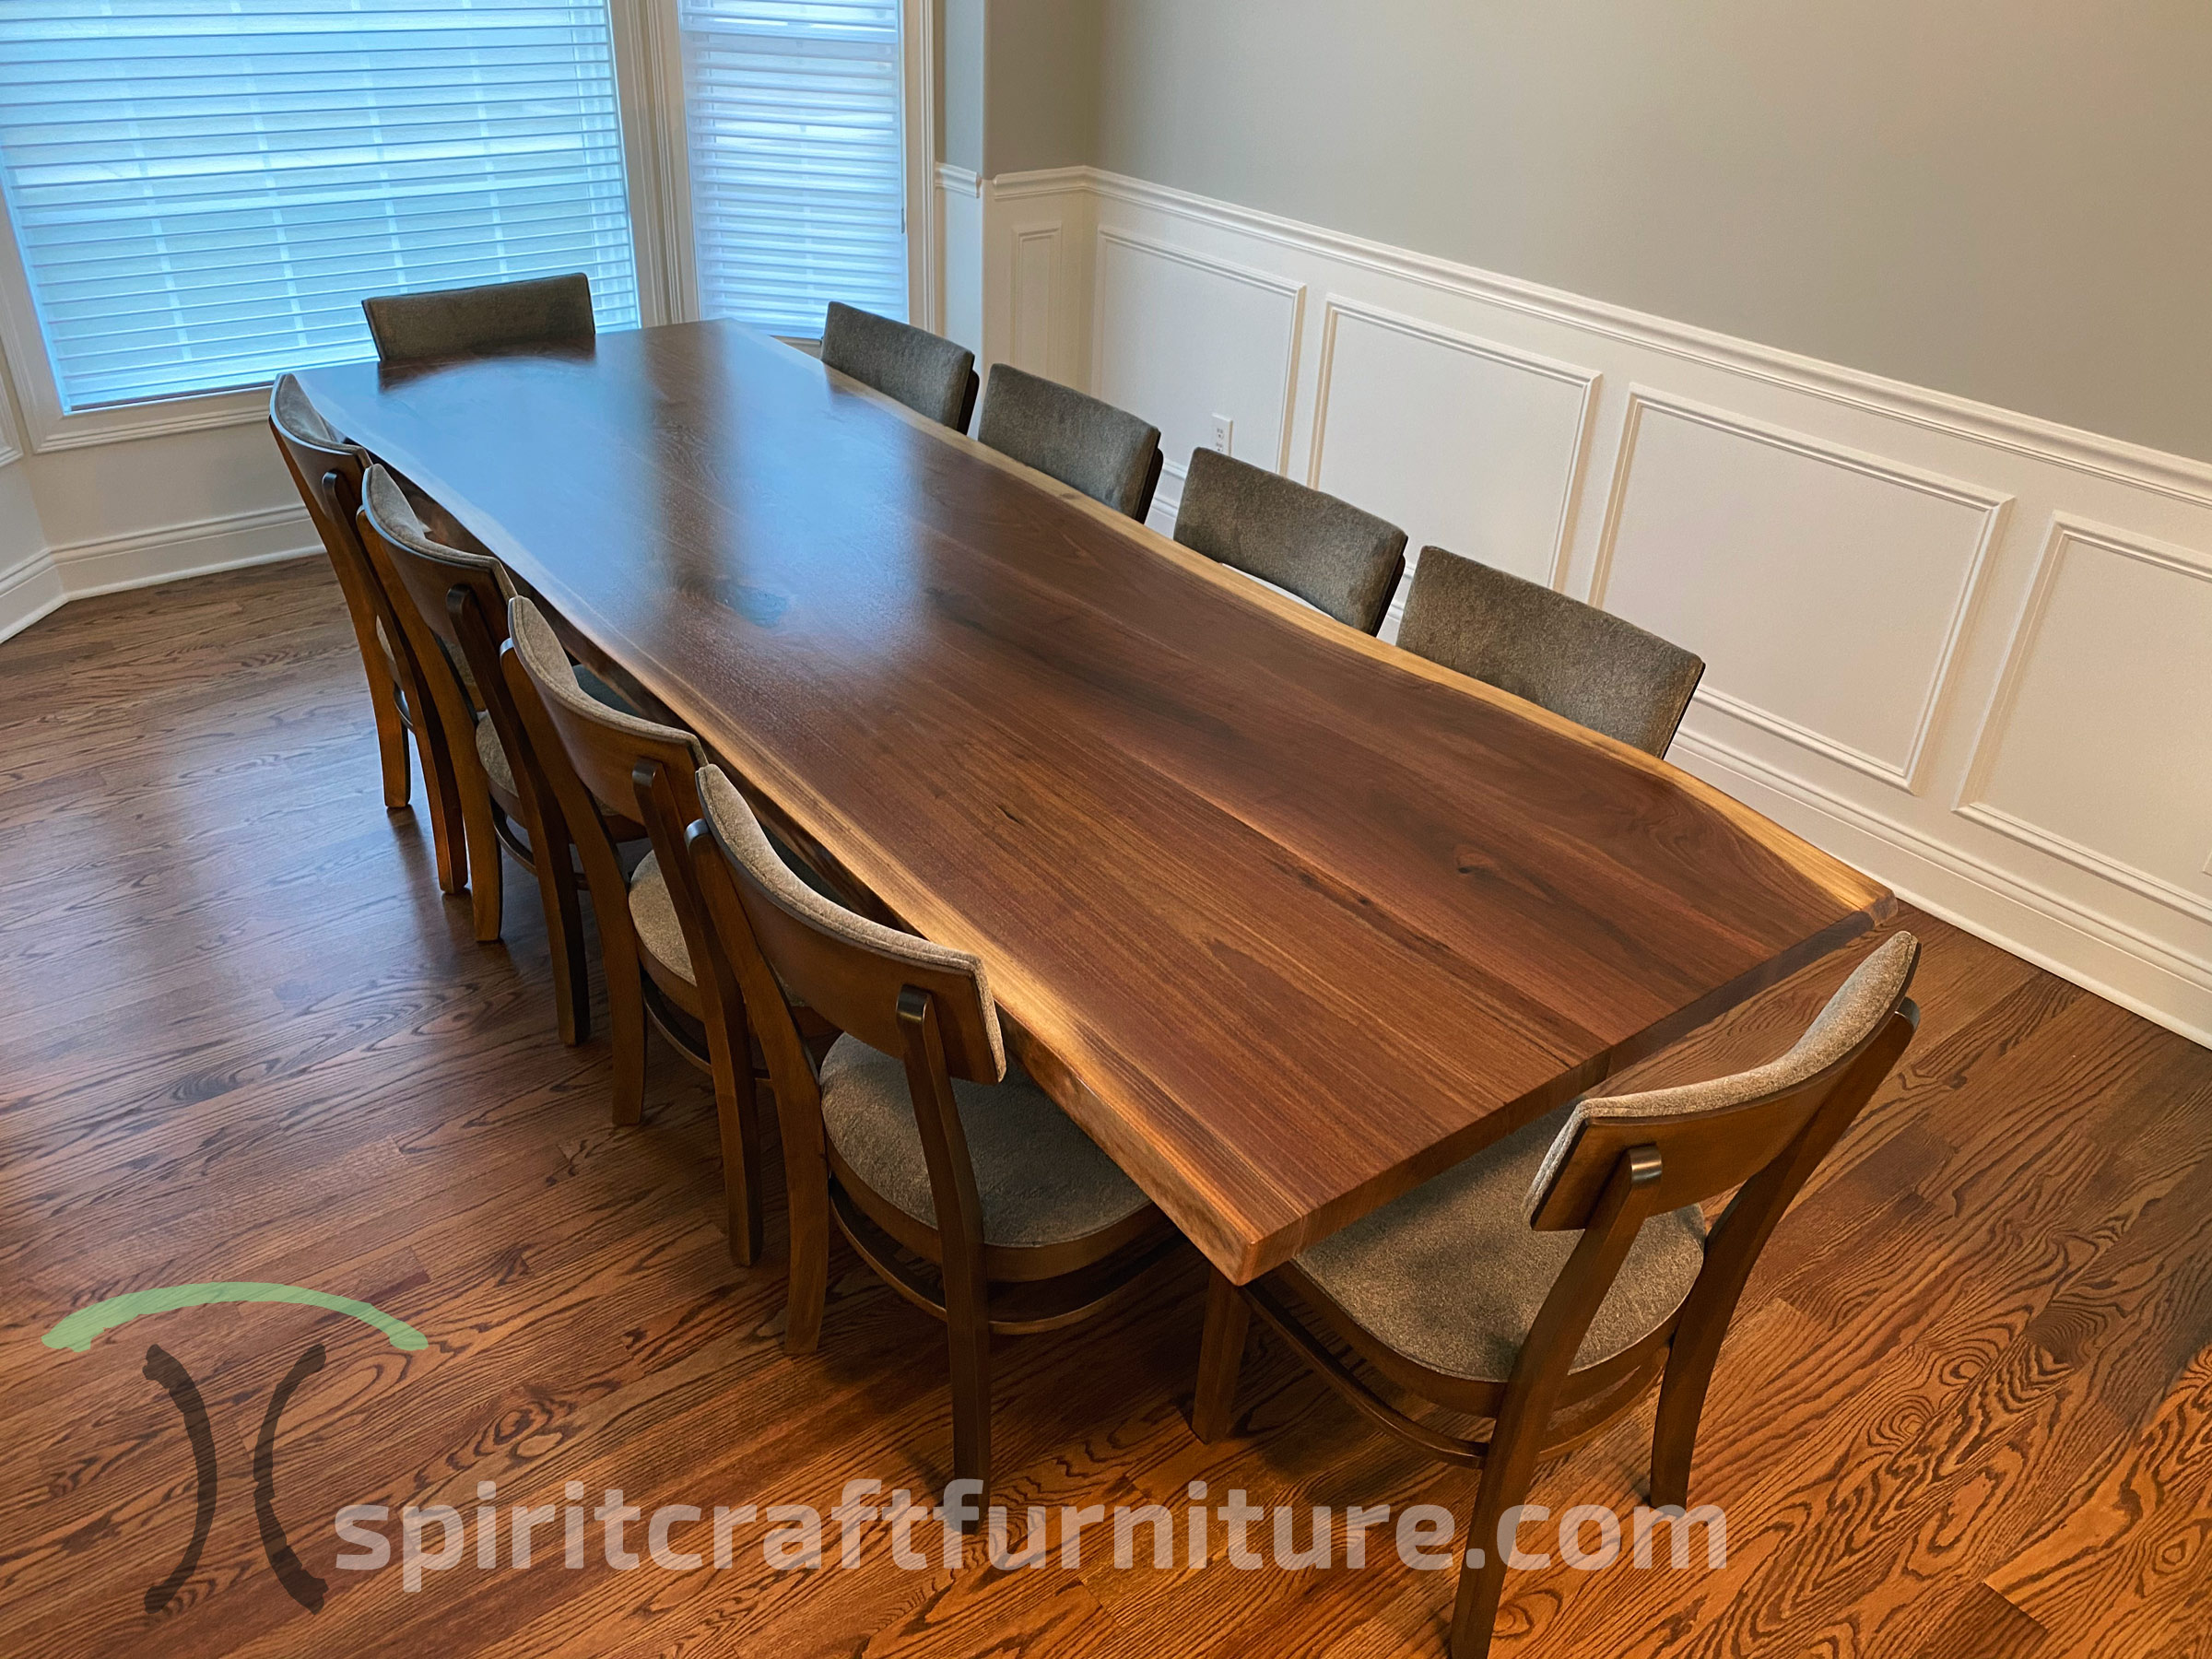 Live edge dining tables, custom fabricated table tops